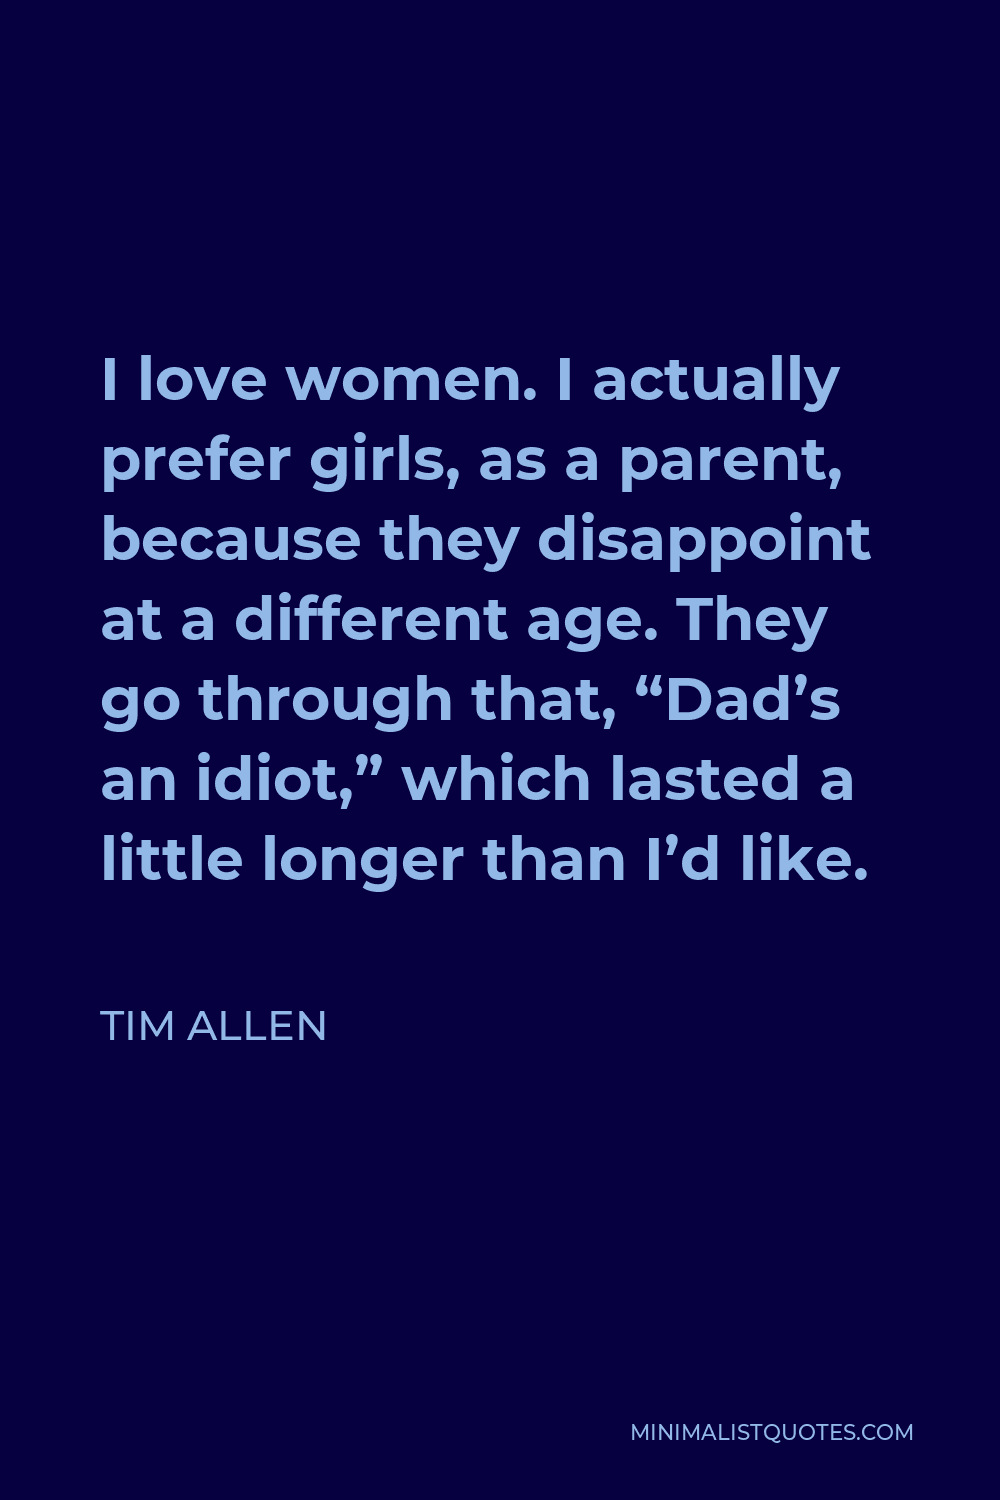 Tim Allen Quote - I love women. I actually prefer girls, as a parent, because they disappoint at a different age. They go through that, “Dad’s an idiot,” which lasted a little longer than I’d like.